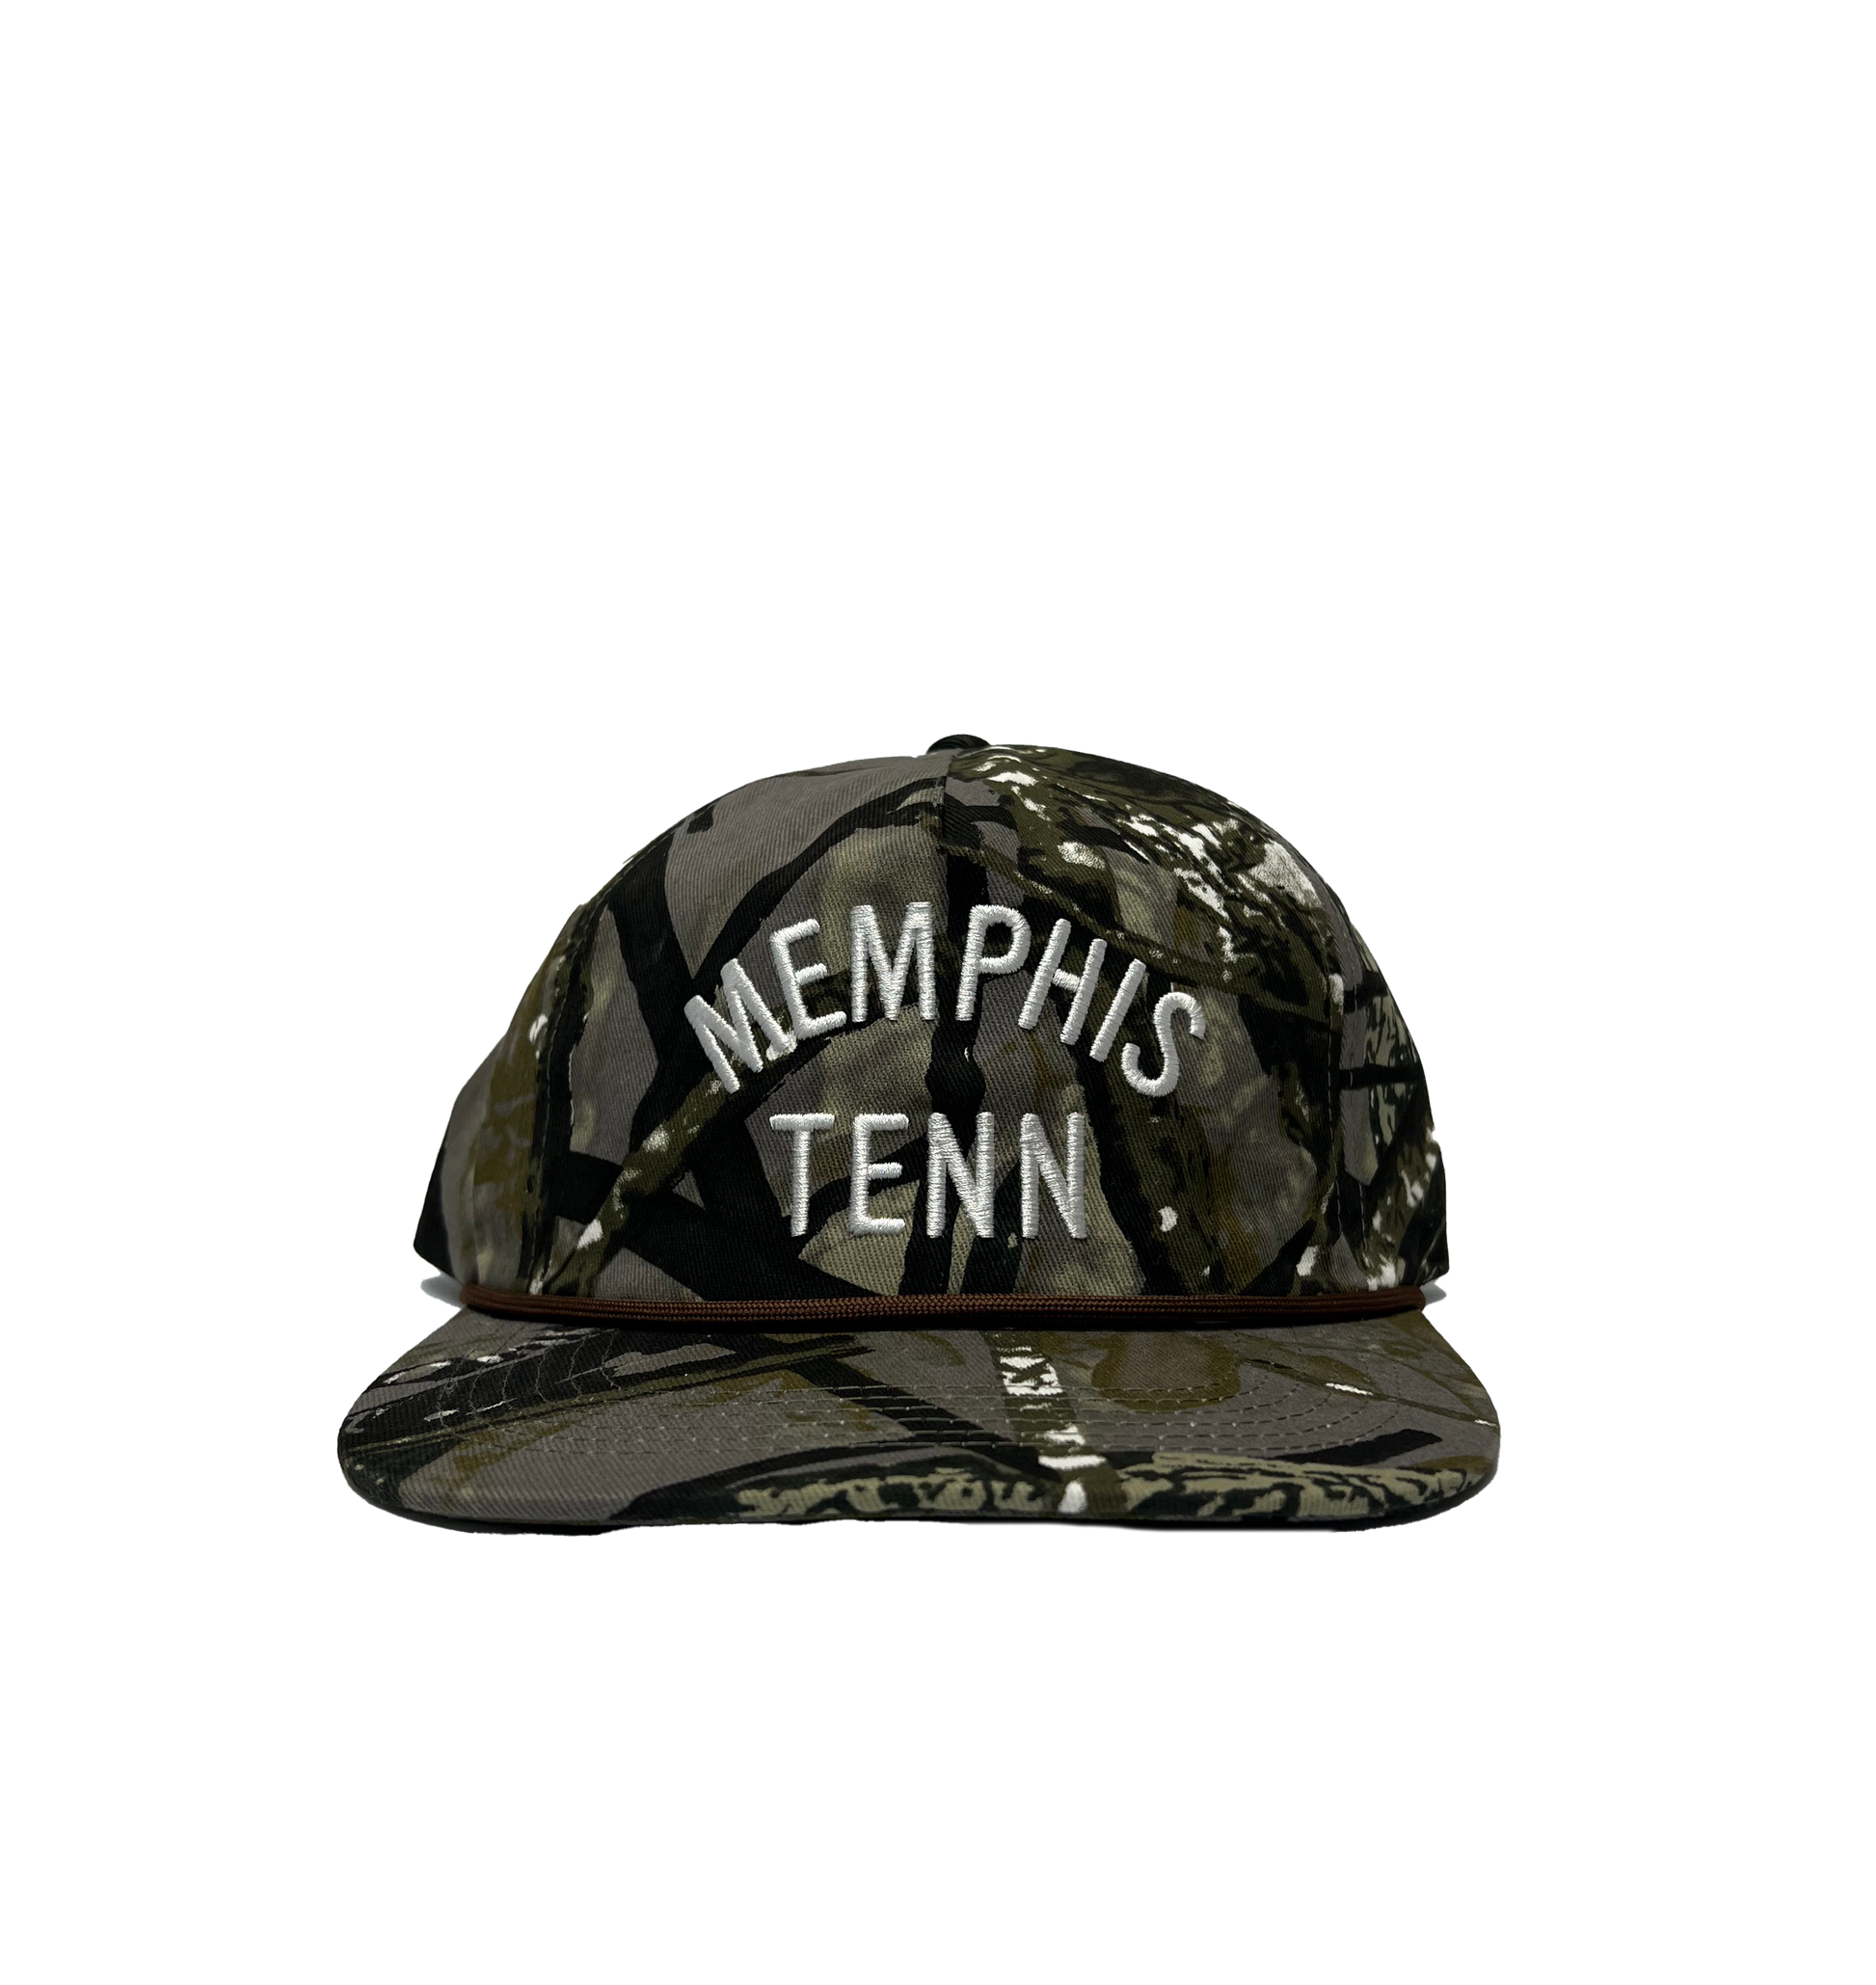 A Memphis Tenn Hat Camo snapback cap with "901" printed in white letters on the front, displayed against a striped grey background. (from Choose901 Merch Shop)